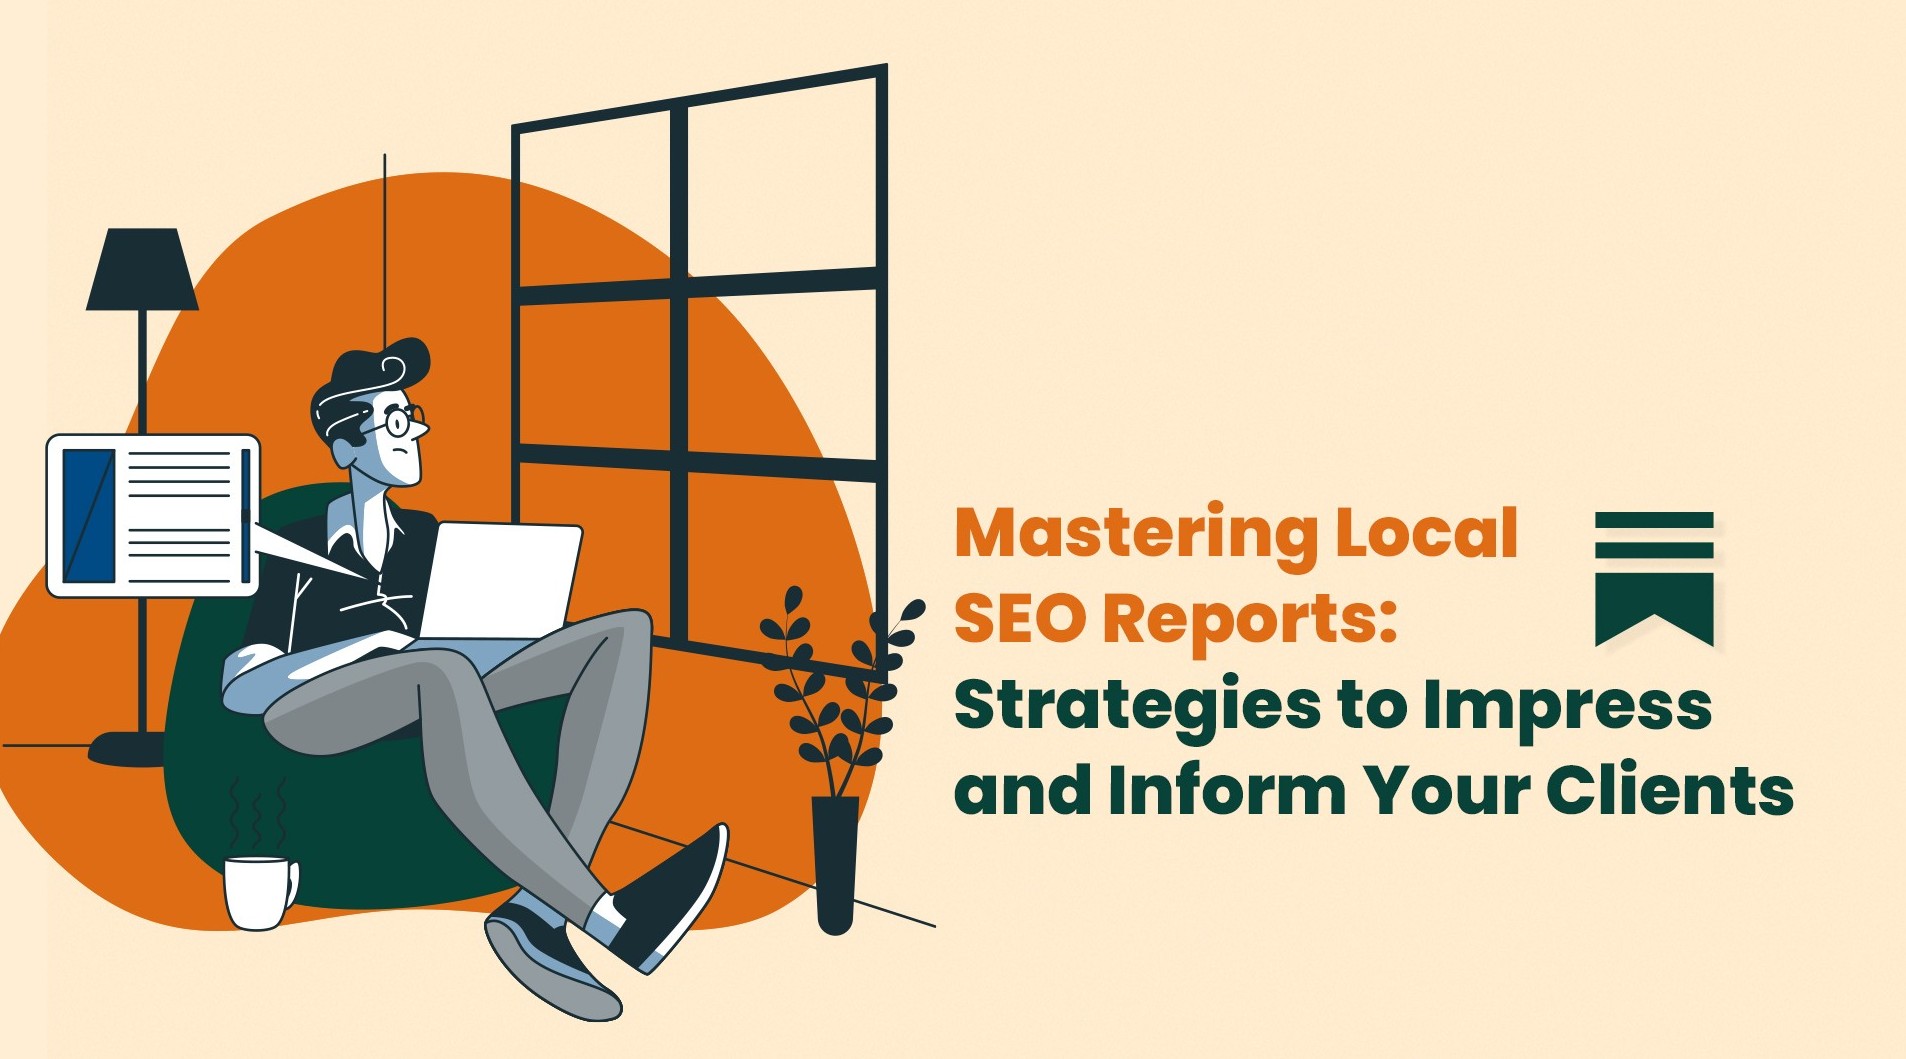  Mastering Local SEO Reports: Strategies to Impress and Inform Your Clients